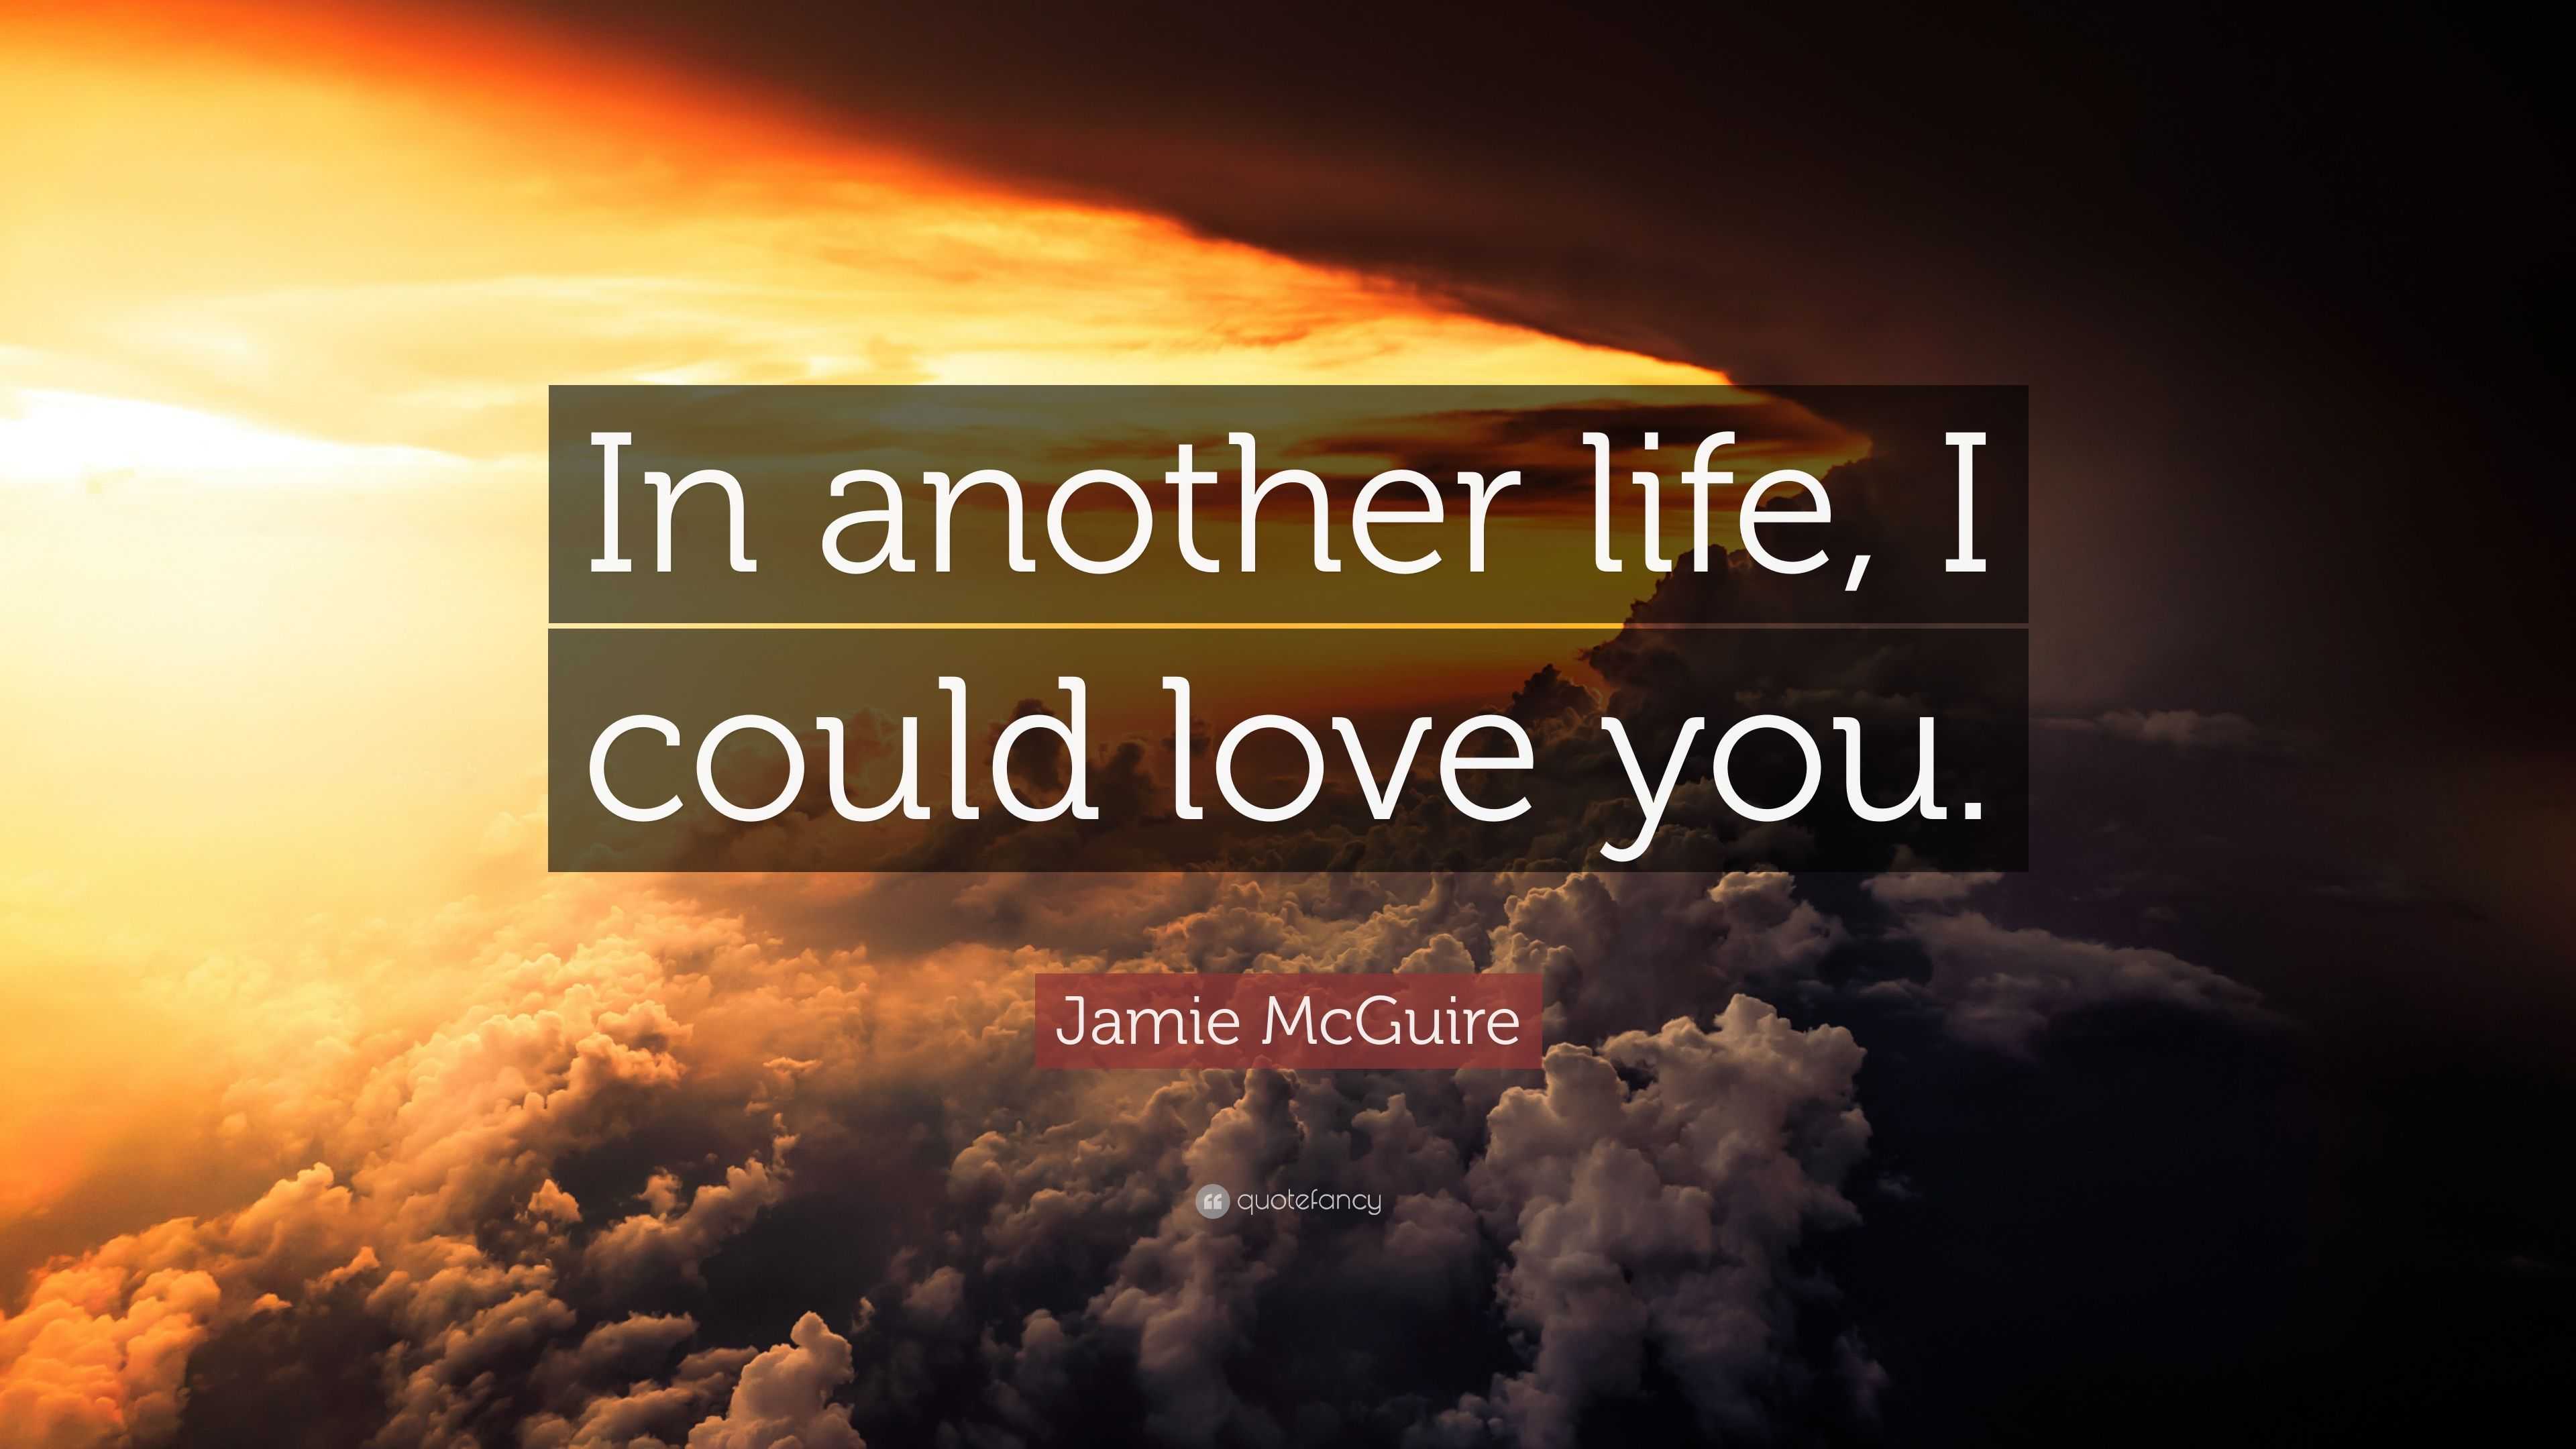 Jamie McGuire Quote: “In another life, I could love you ...